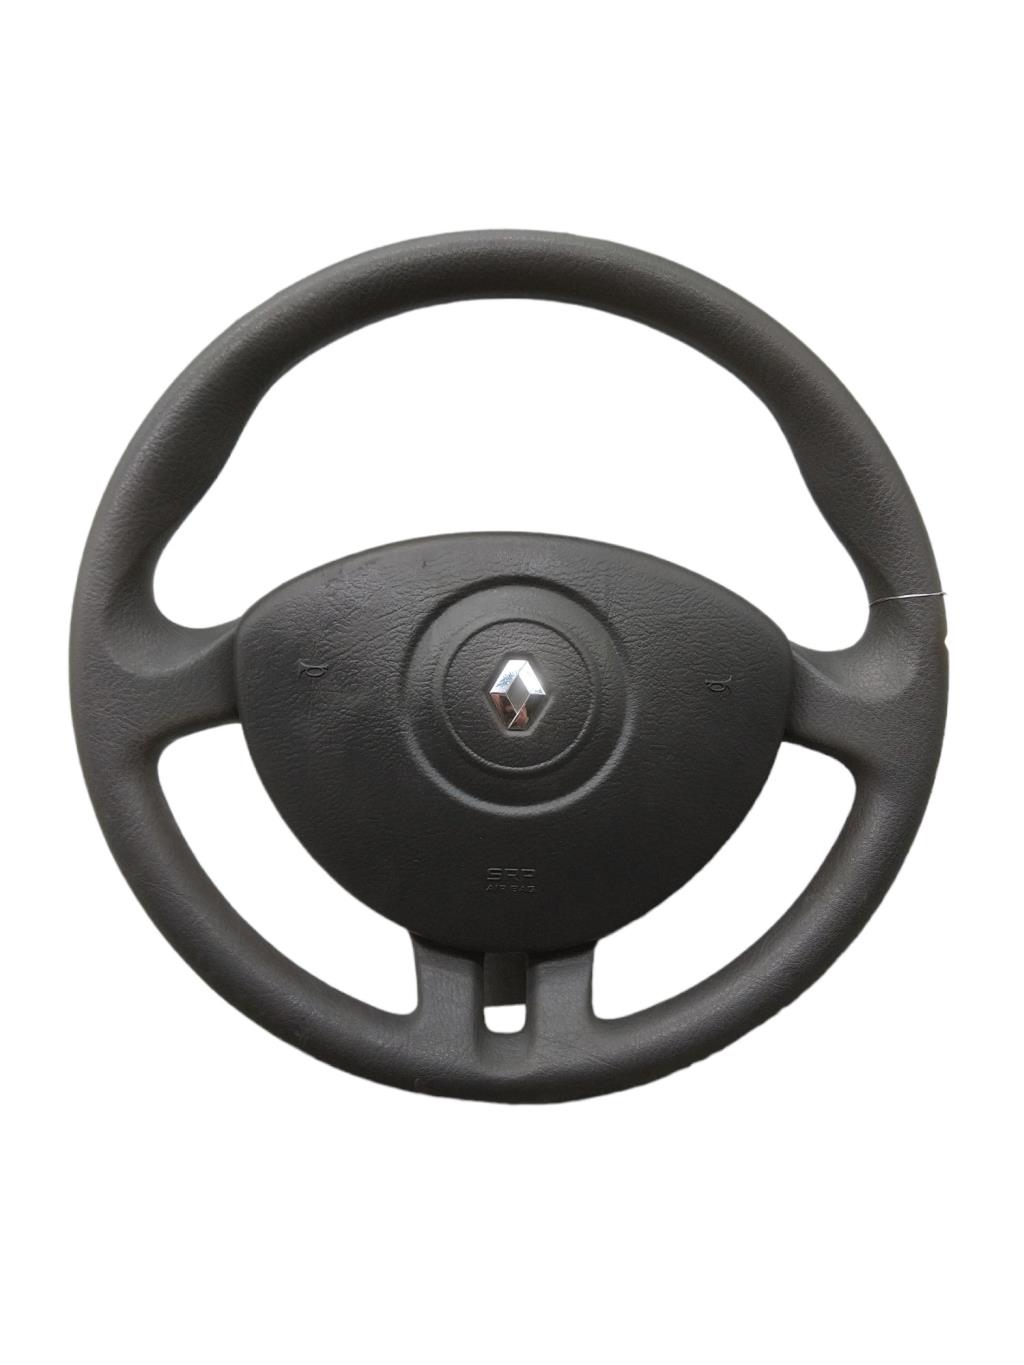 Volant Renault Clio 3 finition cuir nappa - S.A.R.L Sterling